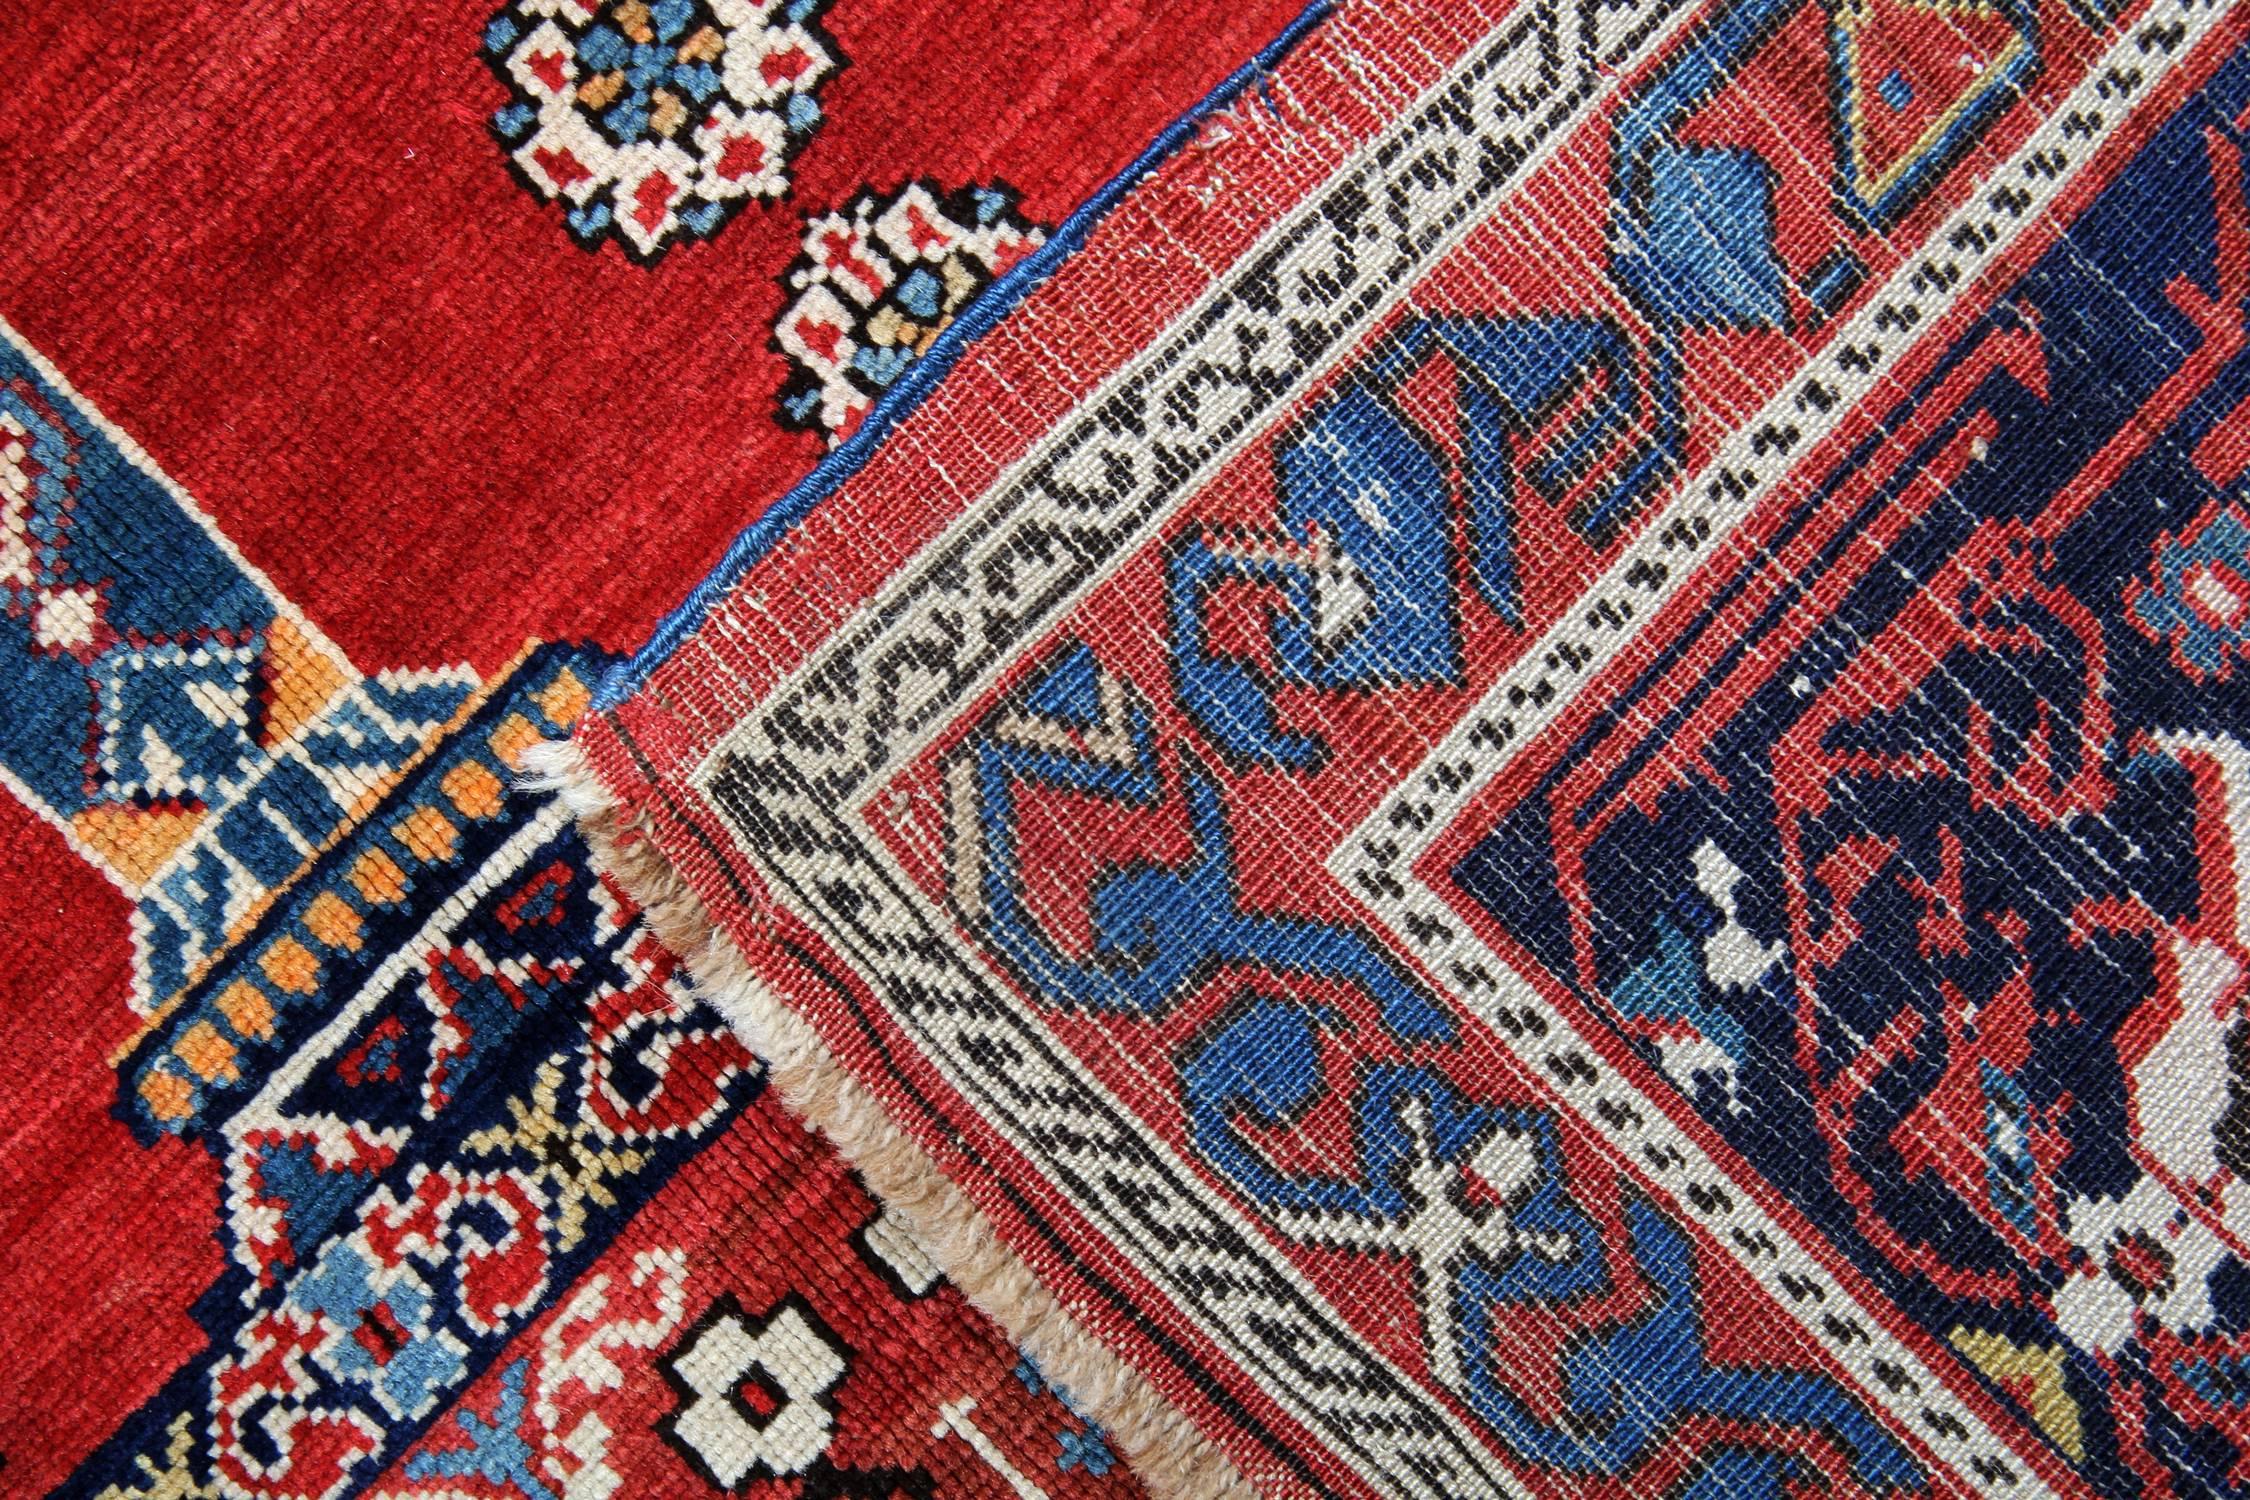 Vegetable Dyed Rare Antique Rugs, Red Handmade Carpet, Caucasian Shirvan Mihrabi Oriental Rugs For Sale